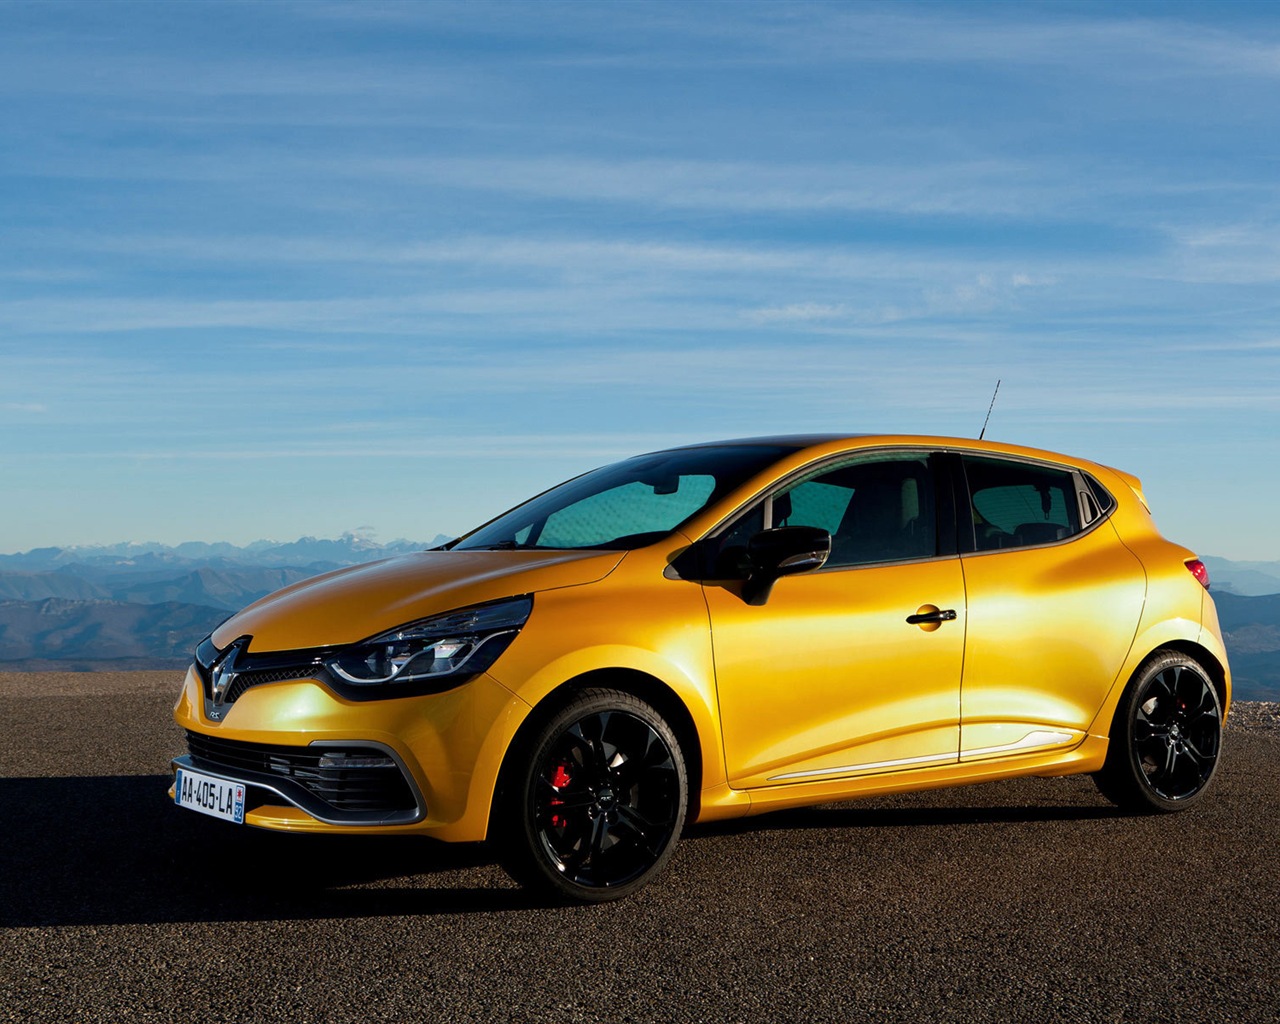 2013 Renault Clio RS 200 yellow color car HD wallpapers #8 - 1280x1024